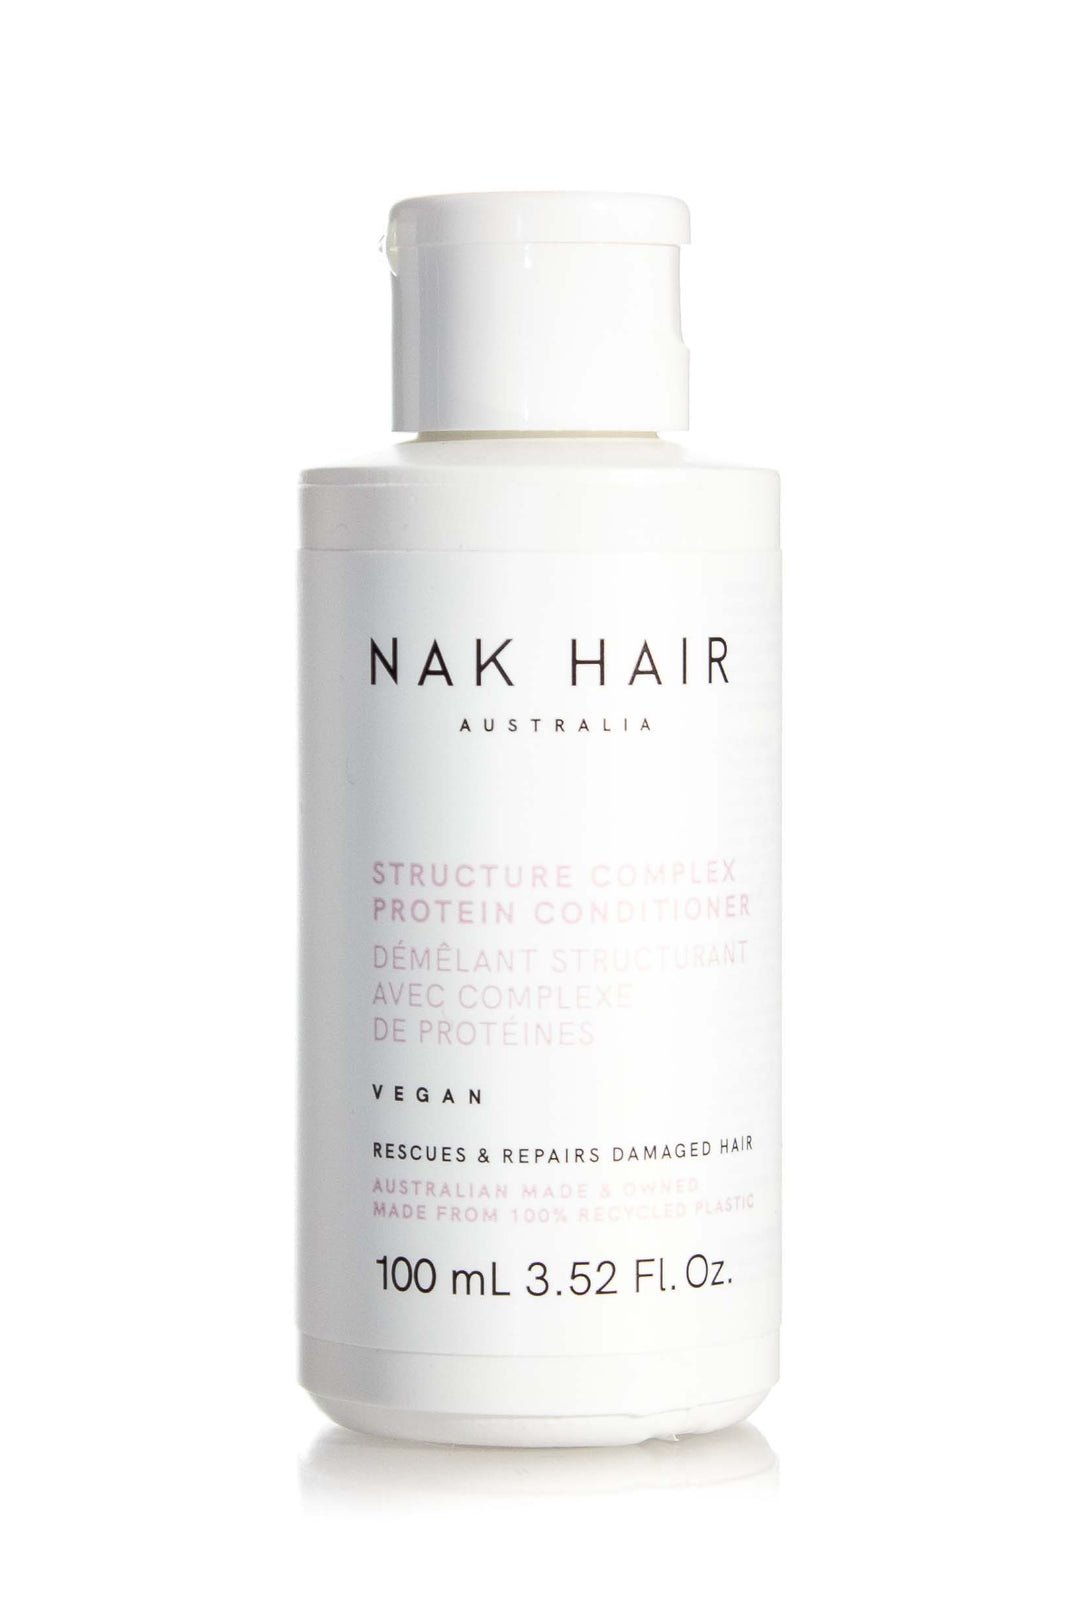 NAK HAIR Structure Complex Protein Conditioner  |  Various Sizes